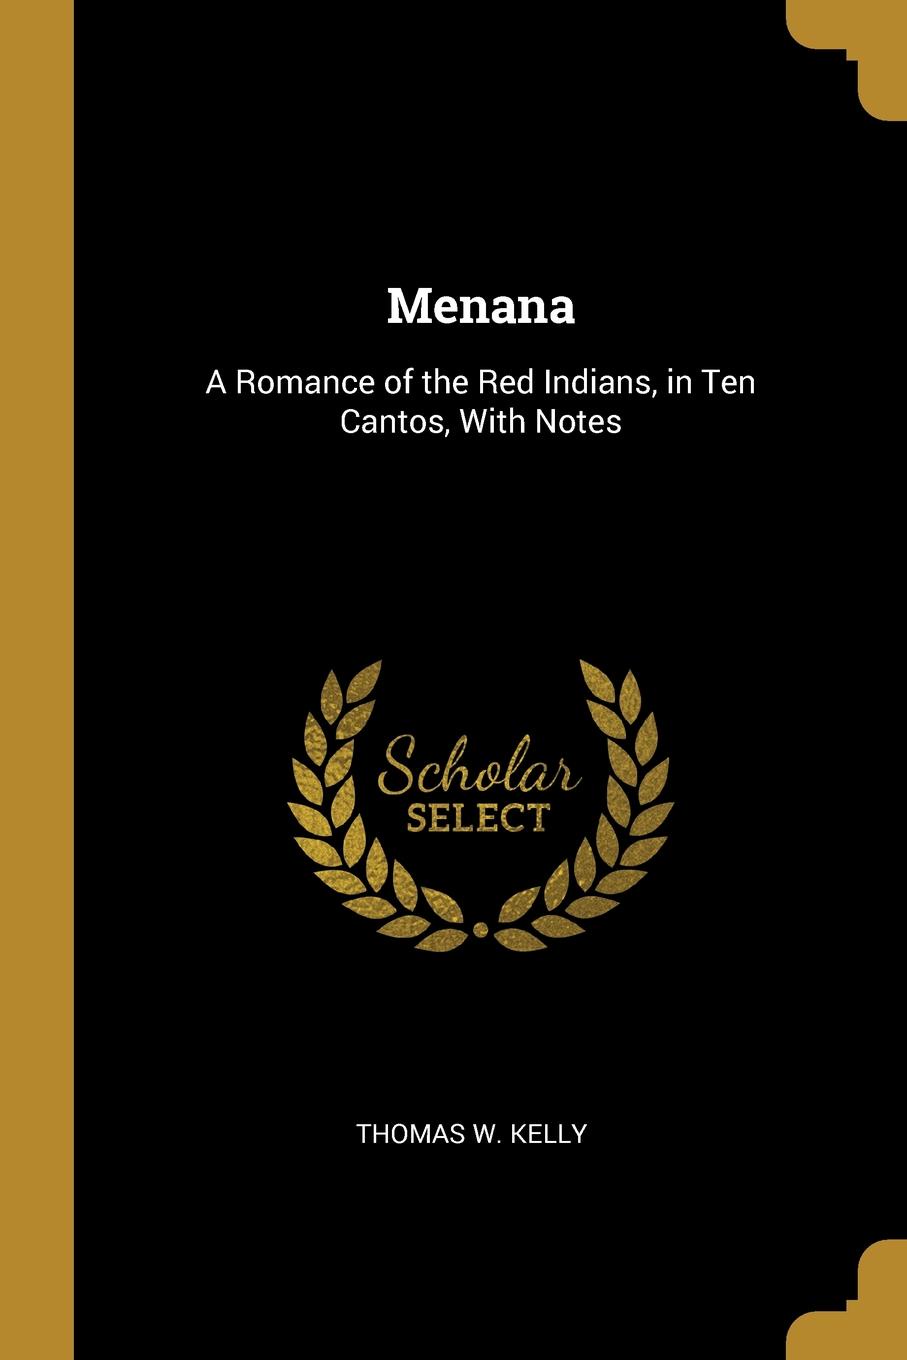 Menana. A Romance of the Red Indians, in Ten Cantos, With Notes